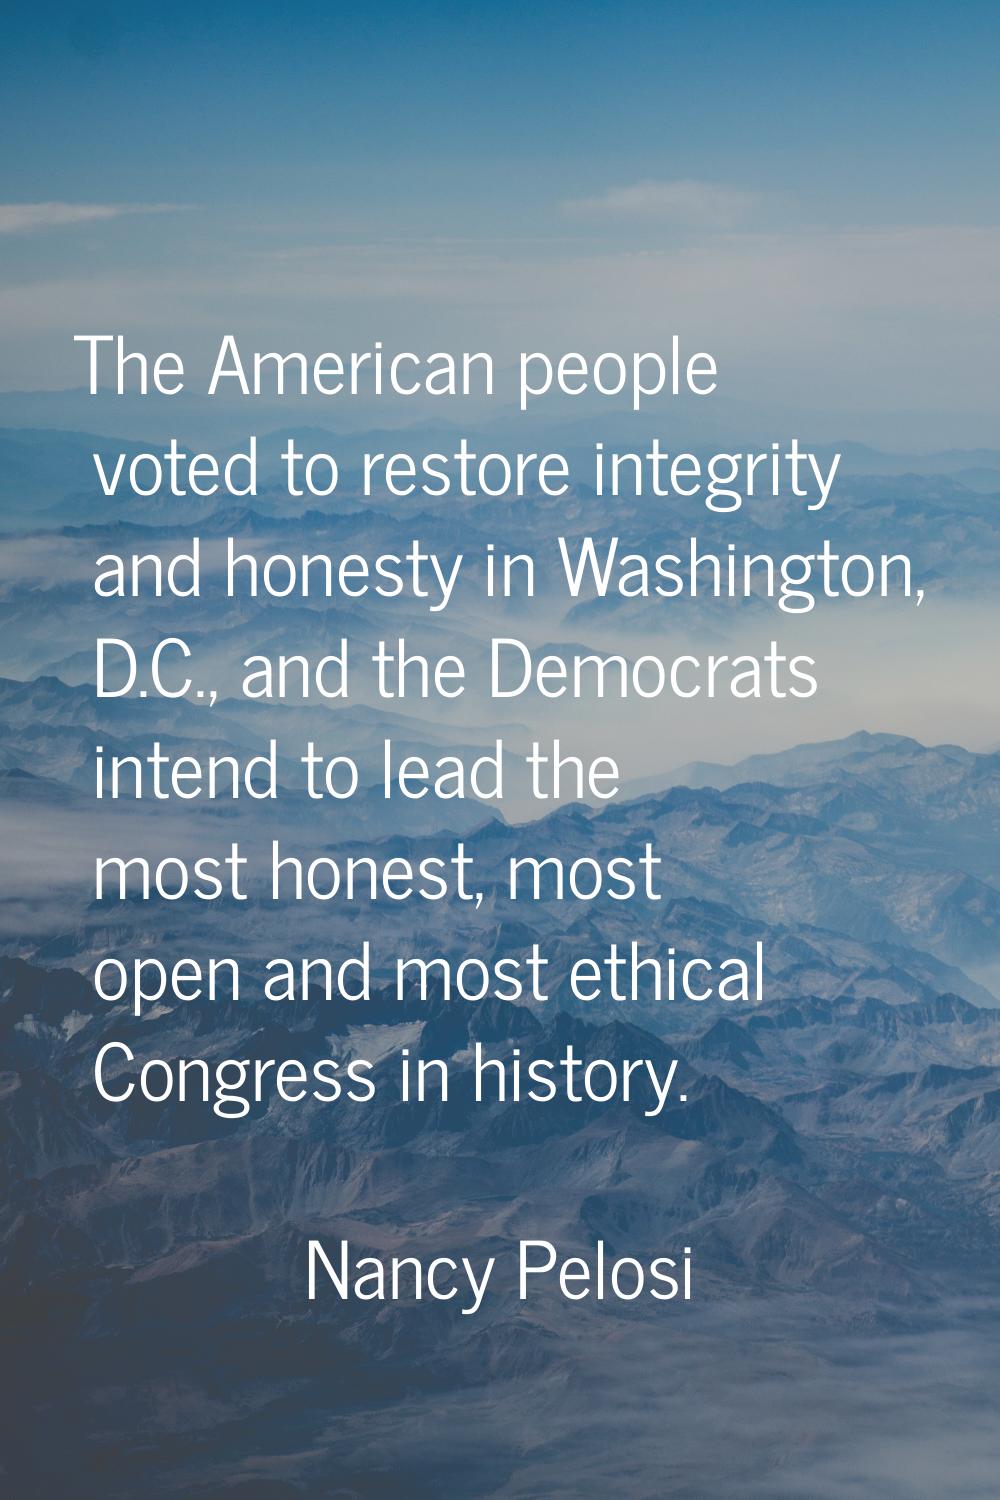 The American people voted to restore integrity and honesty in Washington, D.C., and the Democrats i